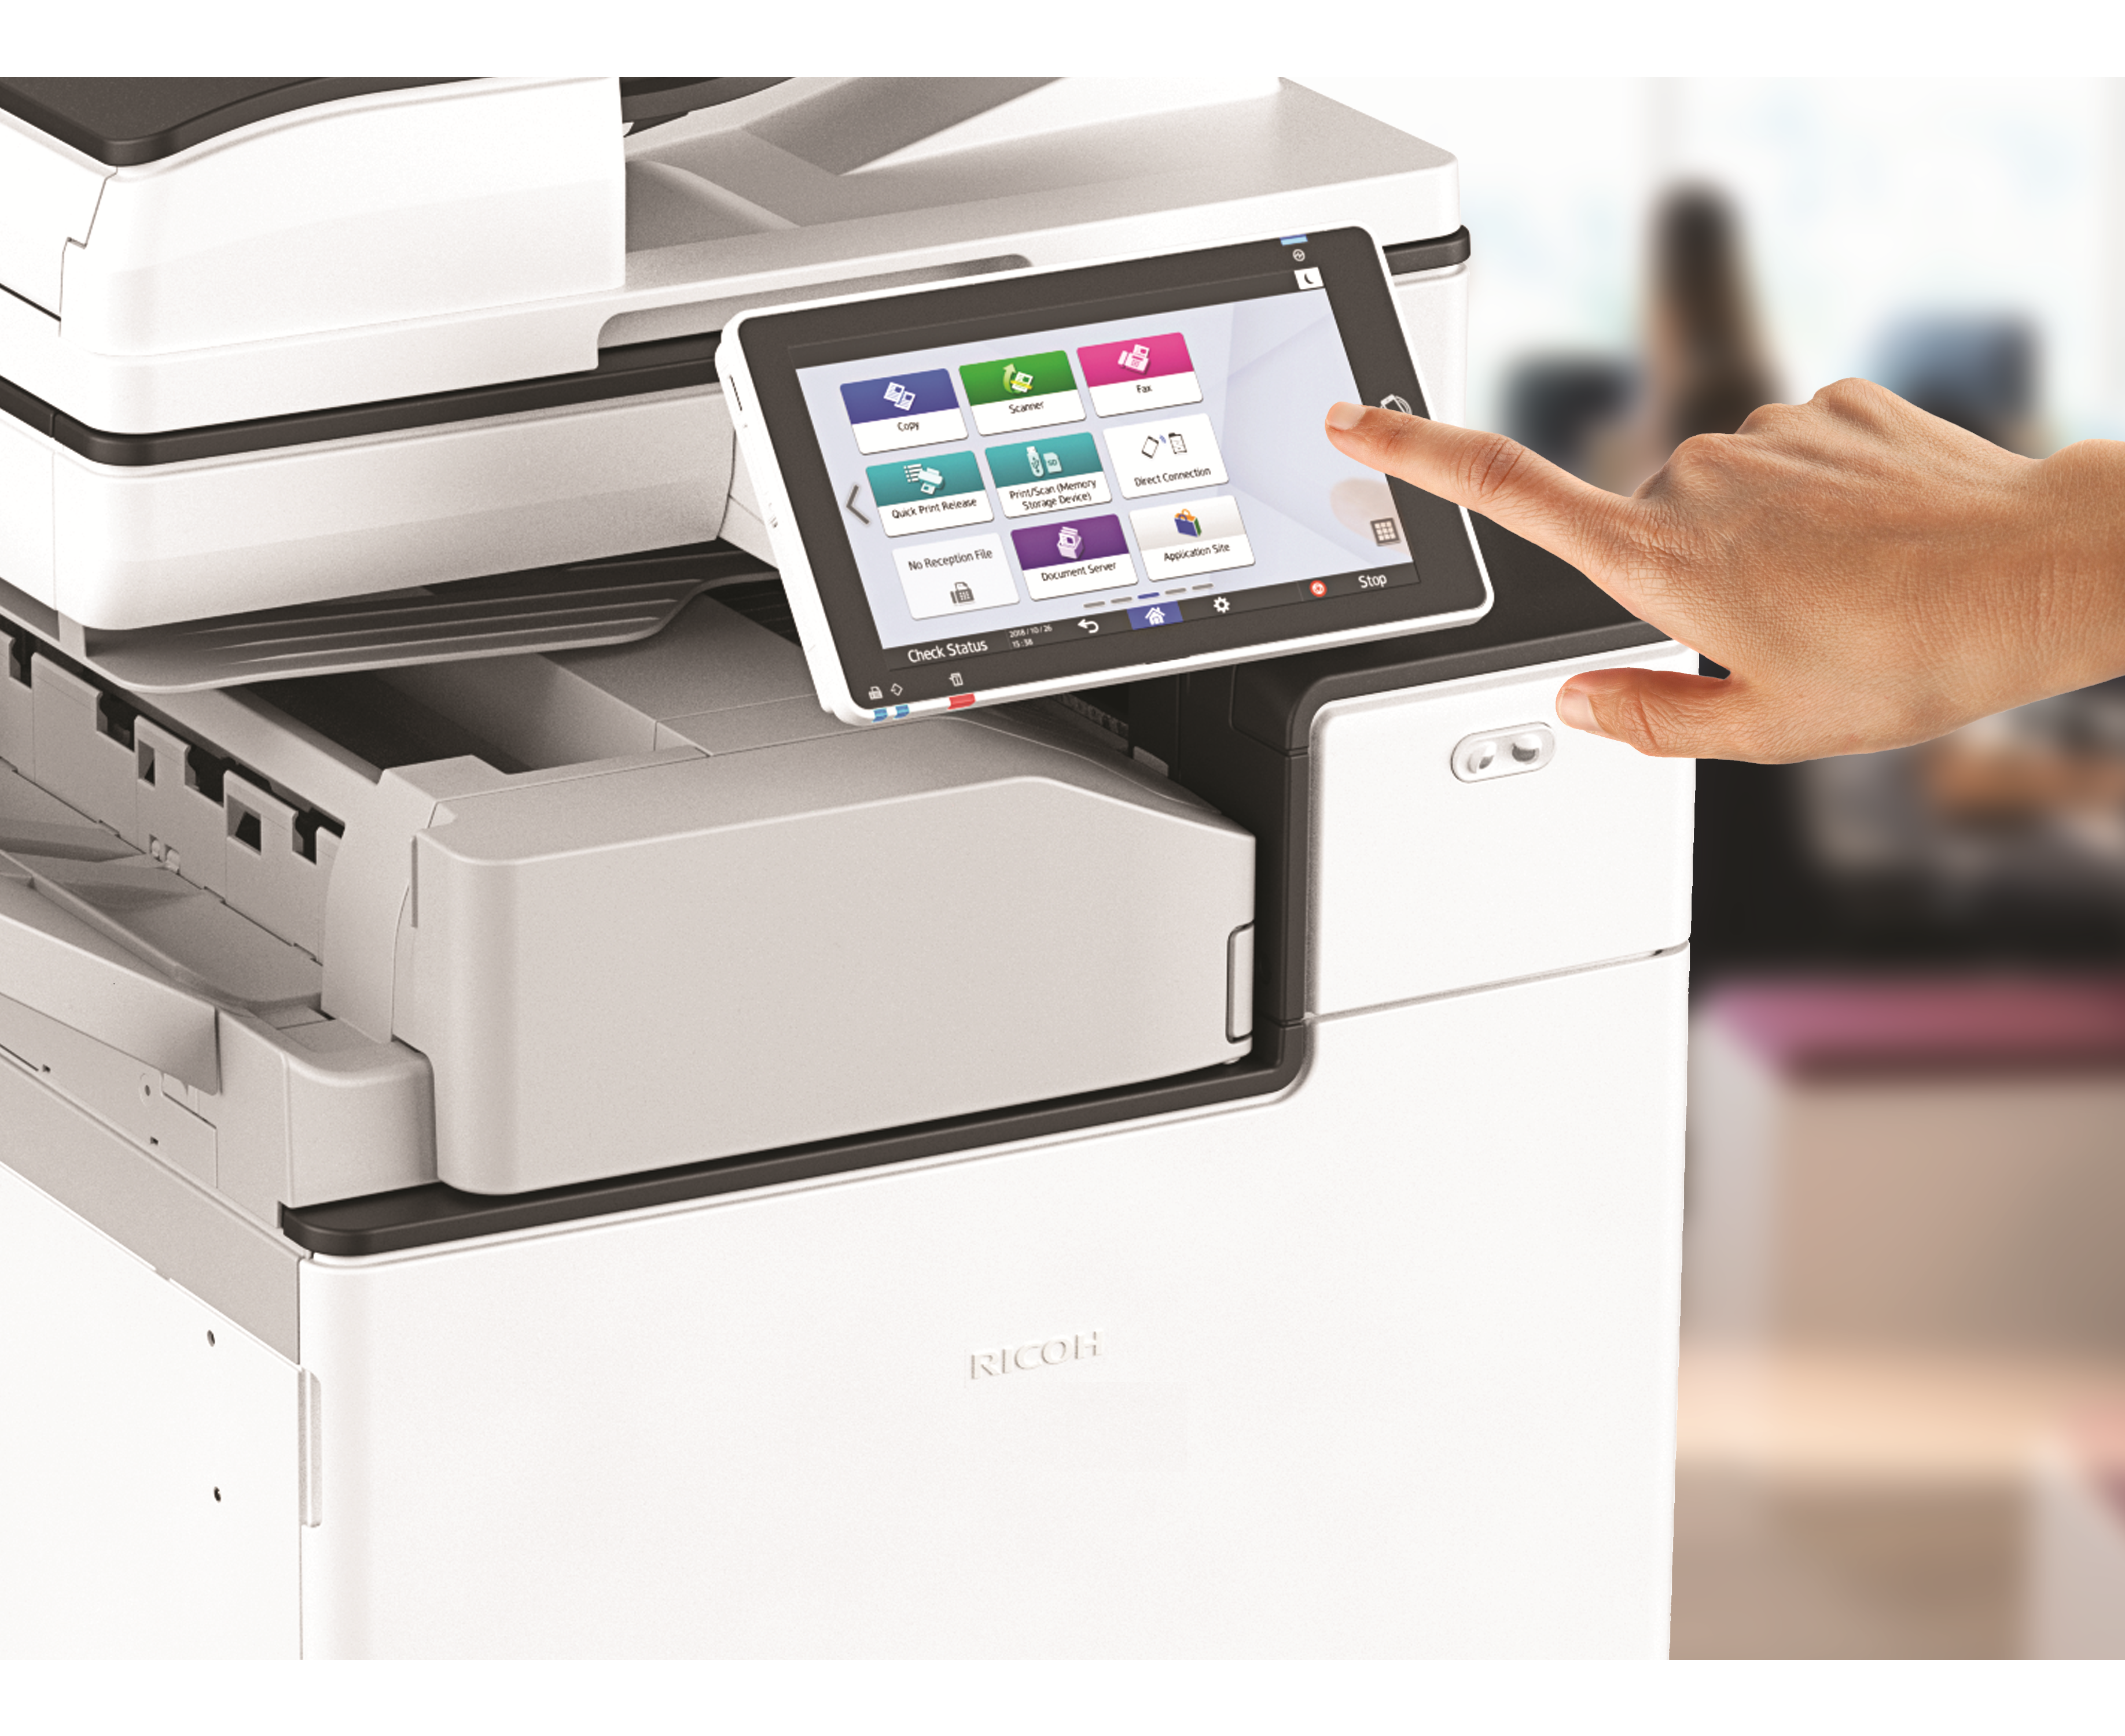 How Ricoh Commercial Printers are better than Konica Minolta, HP, Kyocera, and Toshiba Office Printers